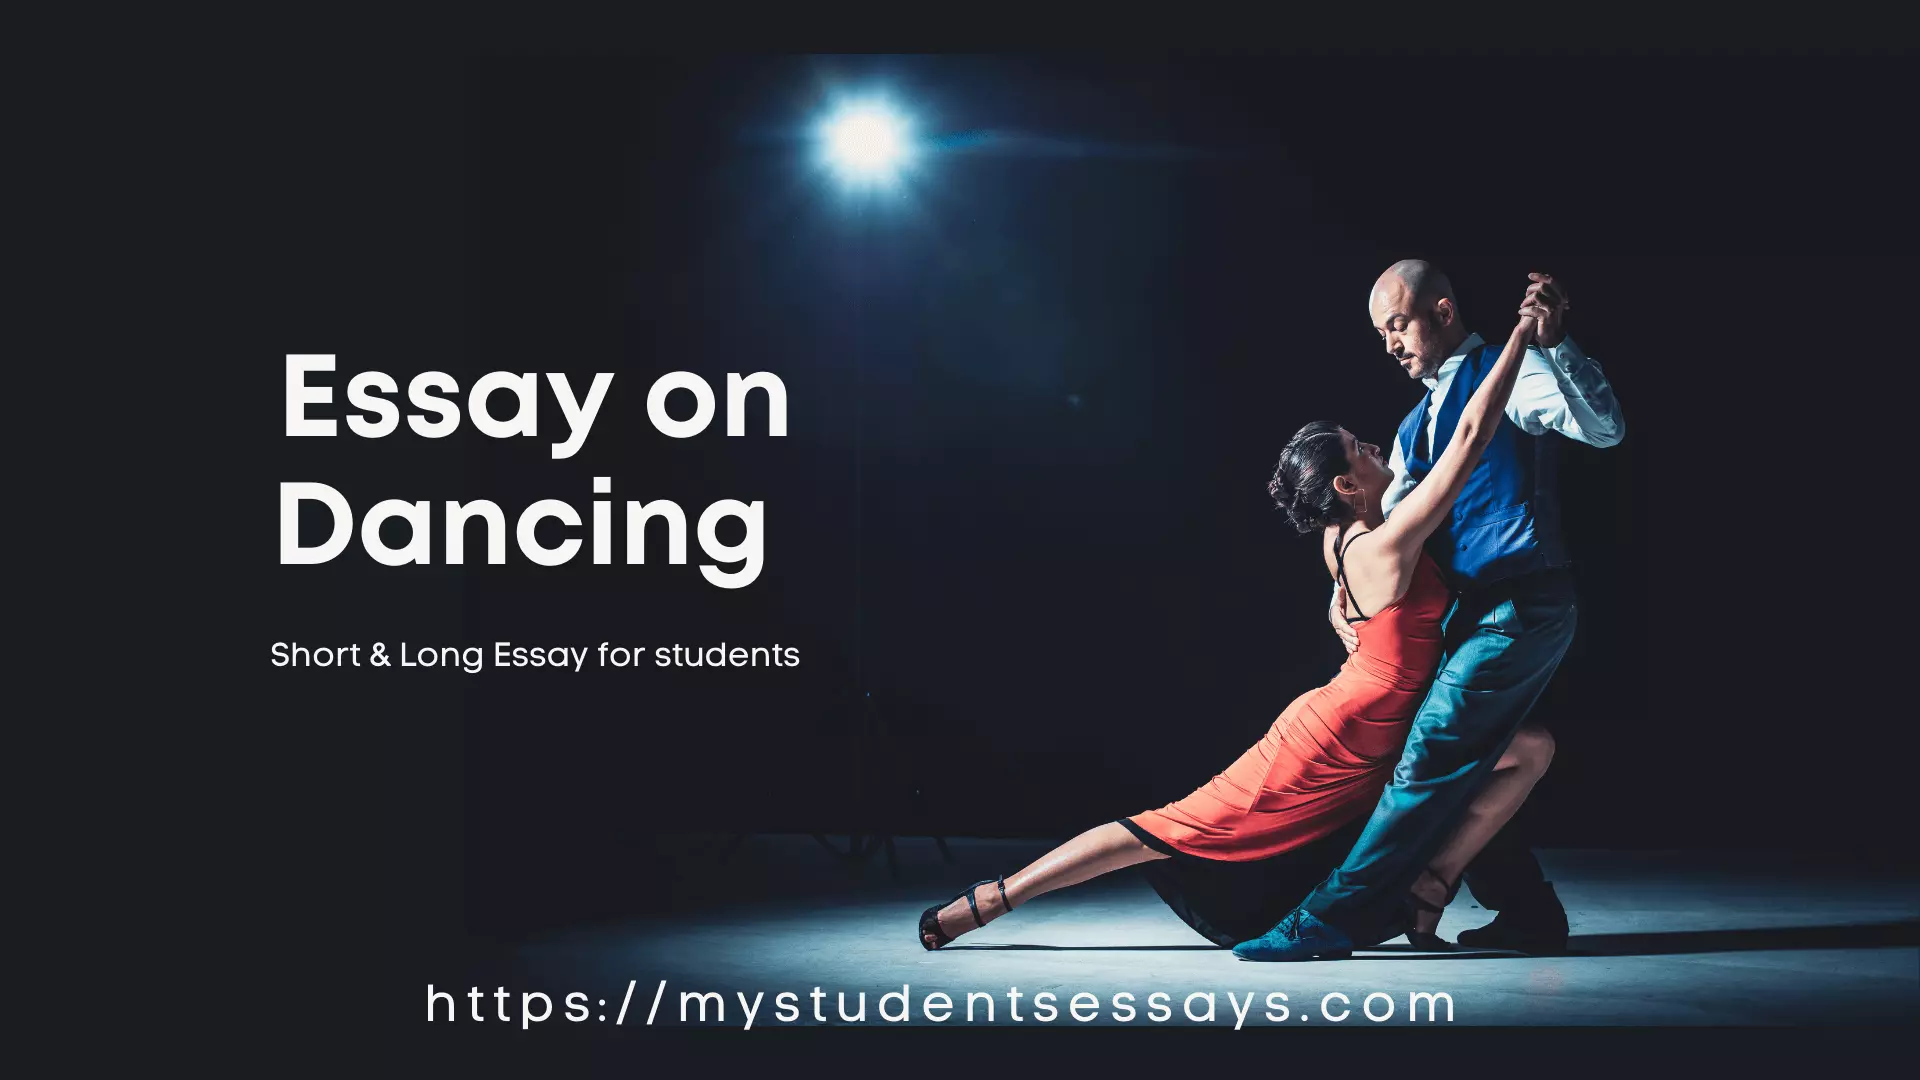 Essay on Dancing for students